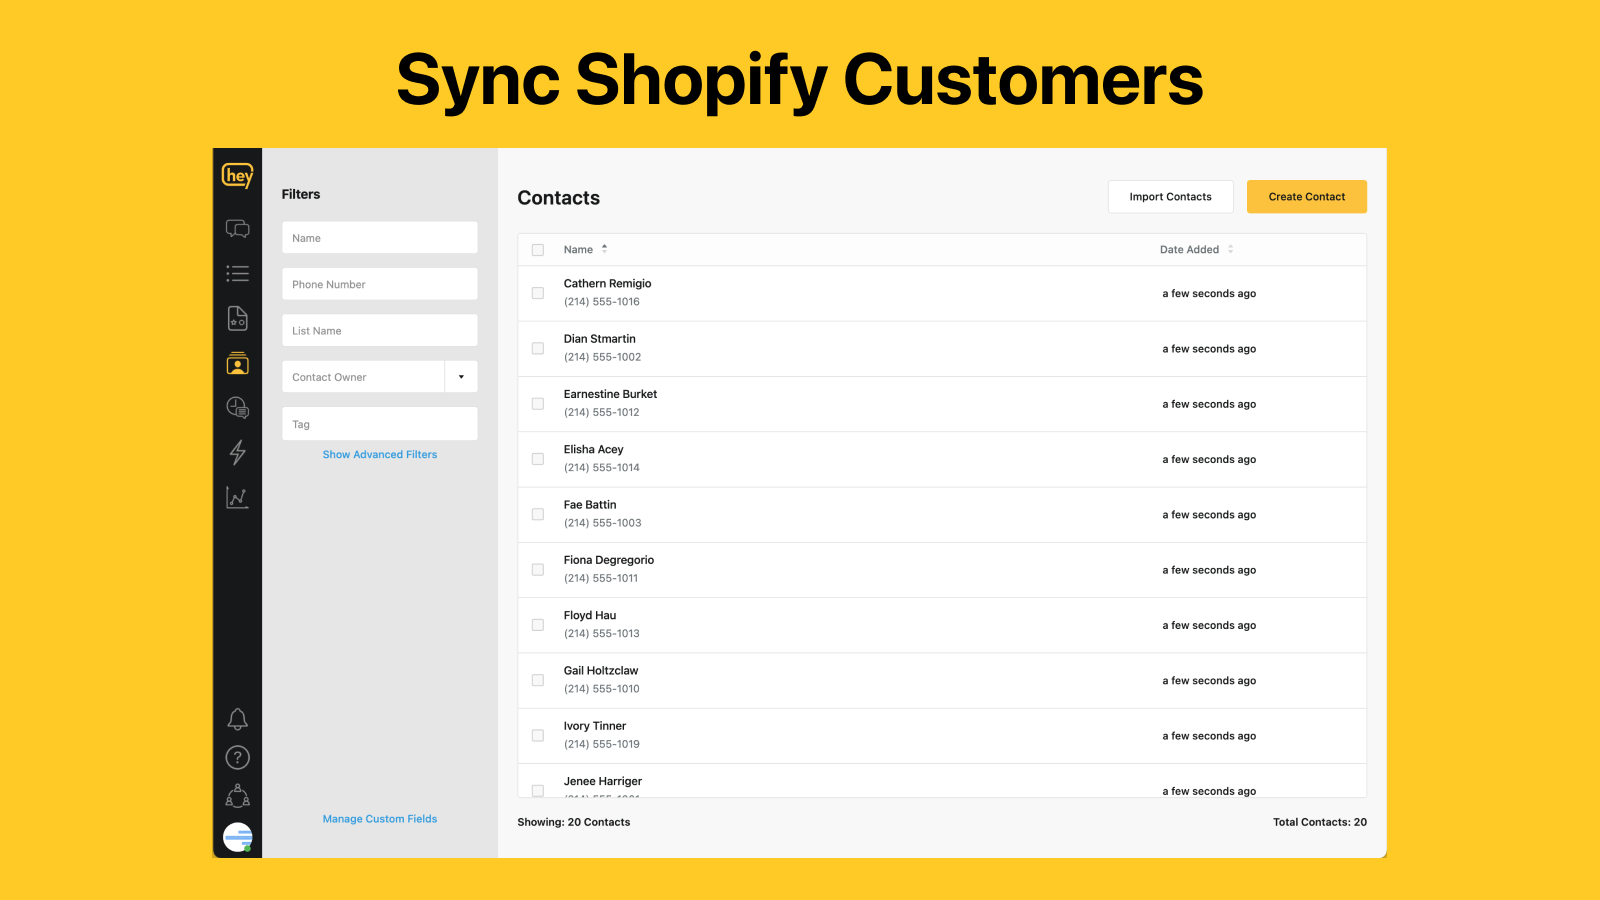 Sync Shopify Customers